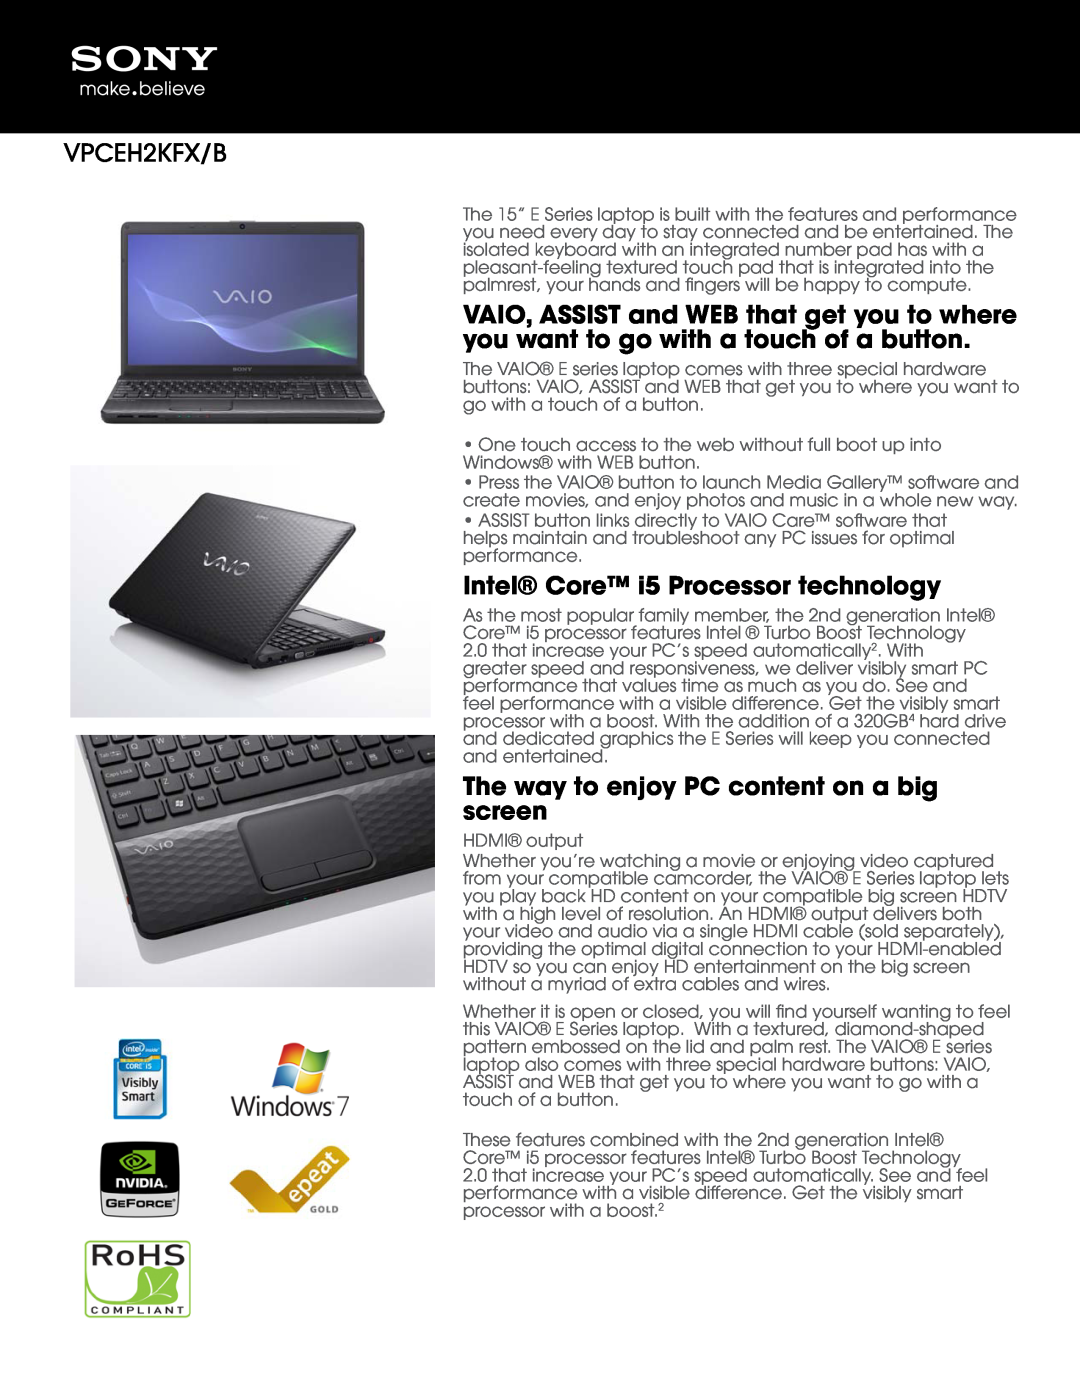 Sony VPCEH2KFX/B manual Intel Core i5 Processor technology, The way to enjoy PC content on a big screen 